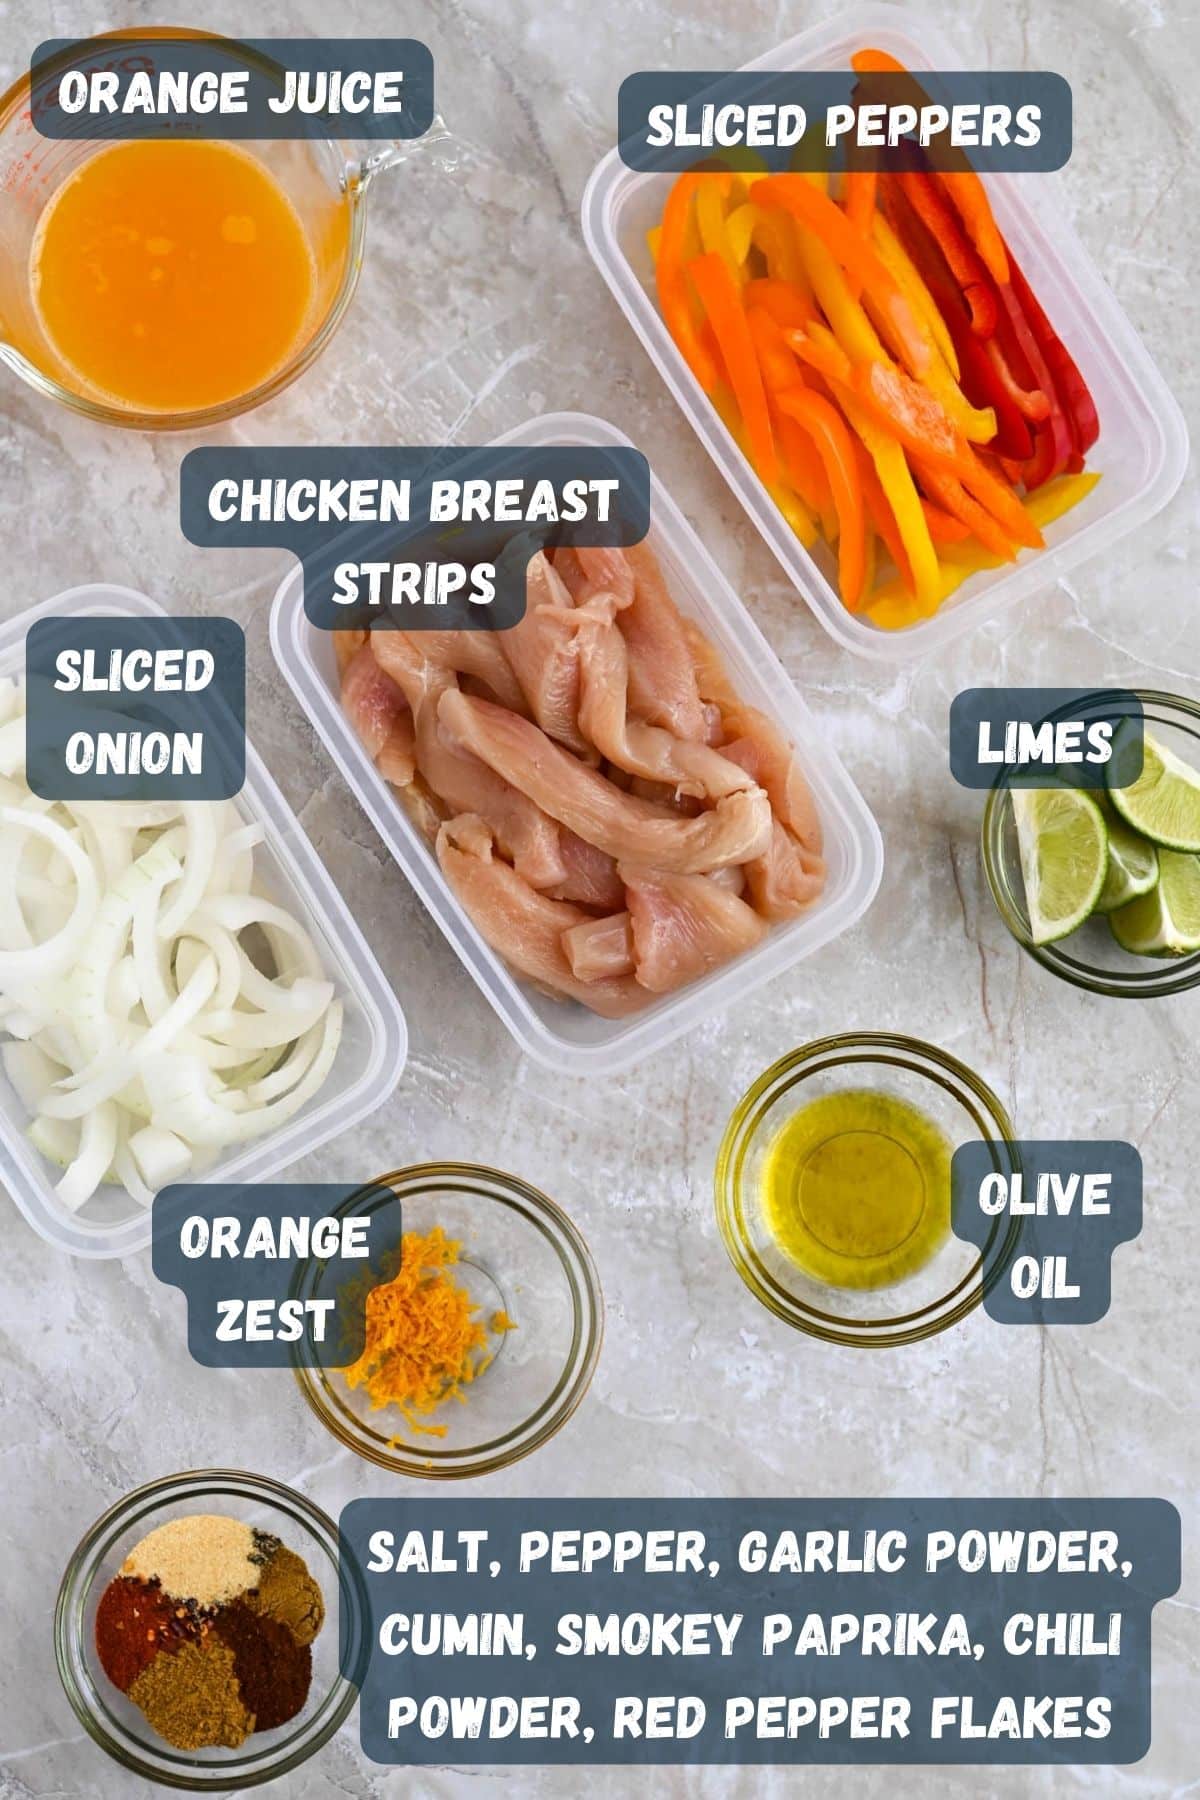 Various ingredients for a recipe displayed, including chicken breast strips, sliced peppers, onions, limes, spices, orange juice, orange zest, and olive oil.